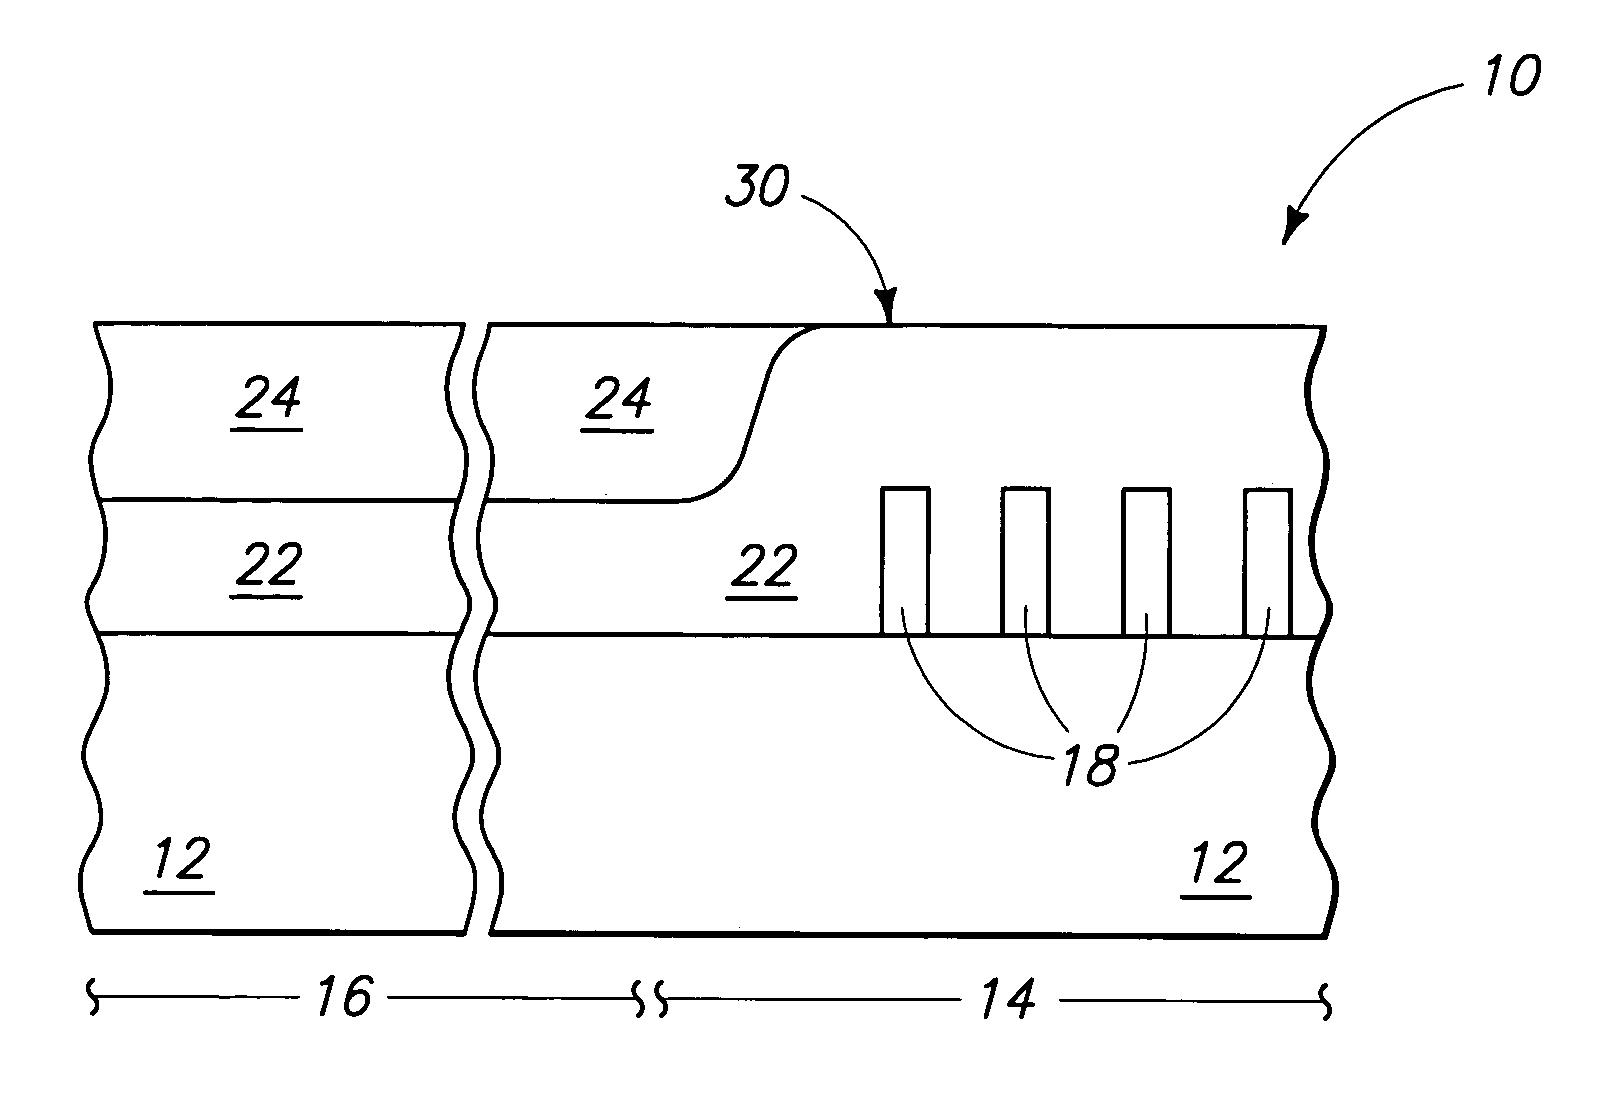 Methods of forming planarized surfaces over semiconductor substrates